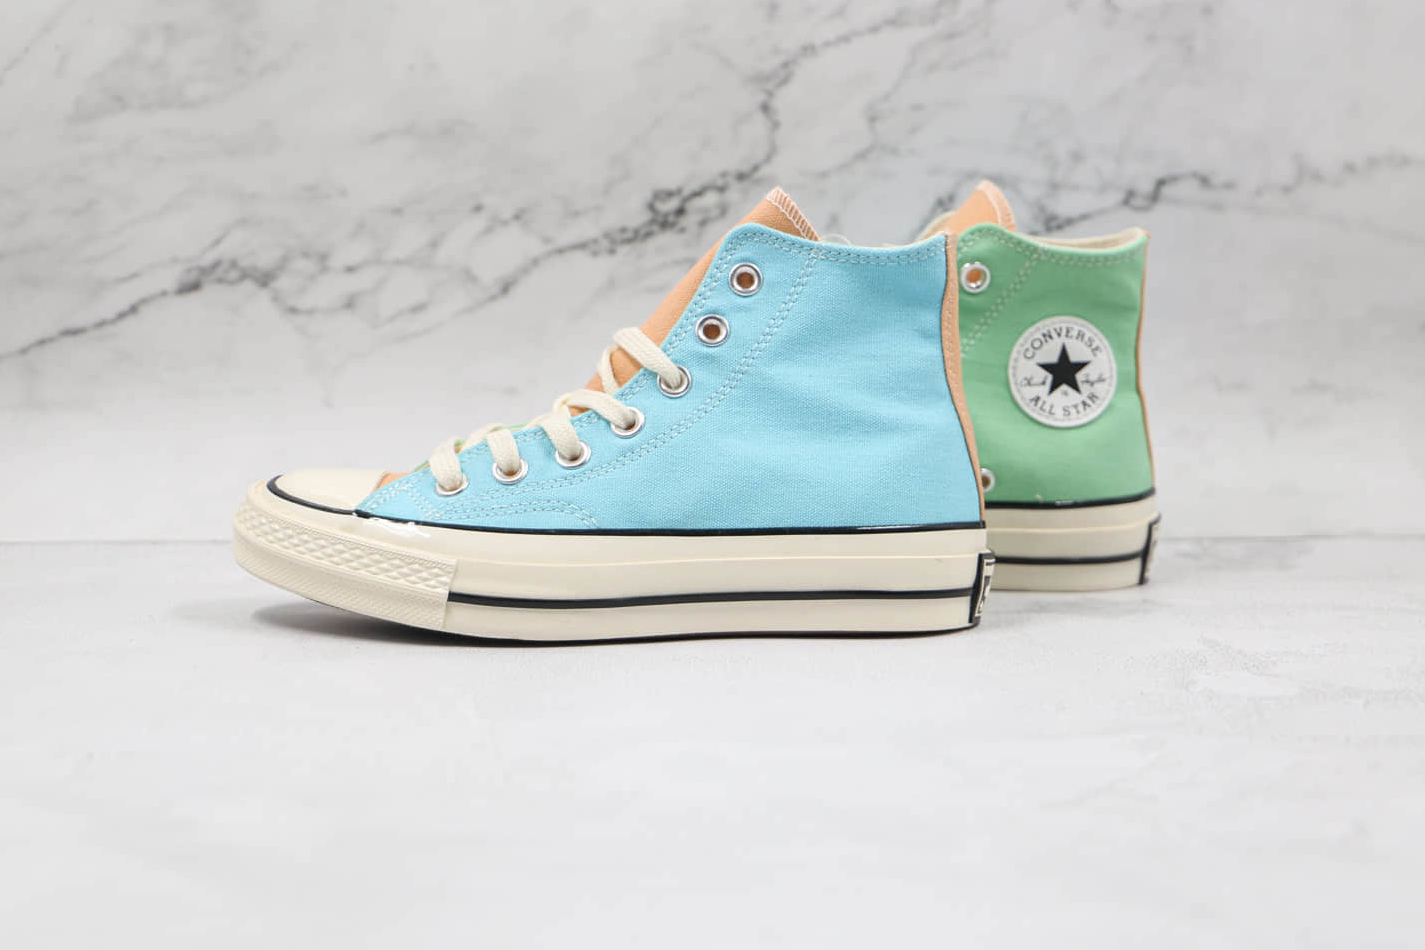 Converse Chuck Taylor All Star 1970s 'Blue Green' 171124C - Vintage Style Sneakers